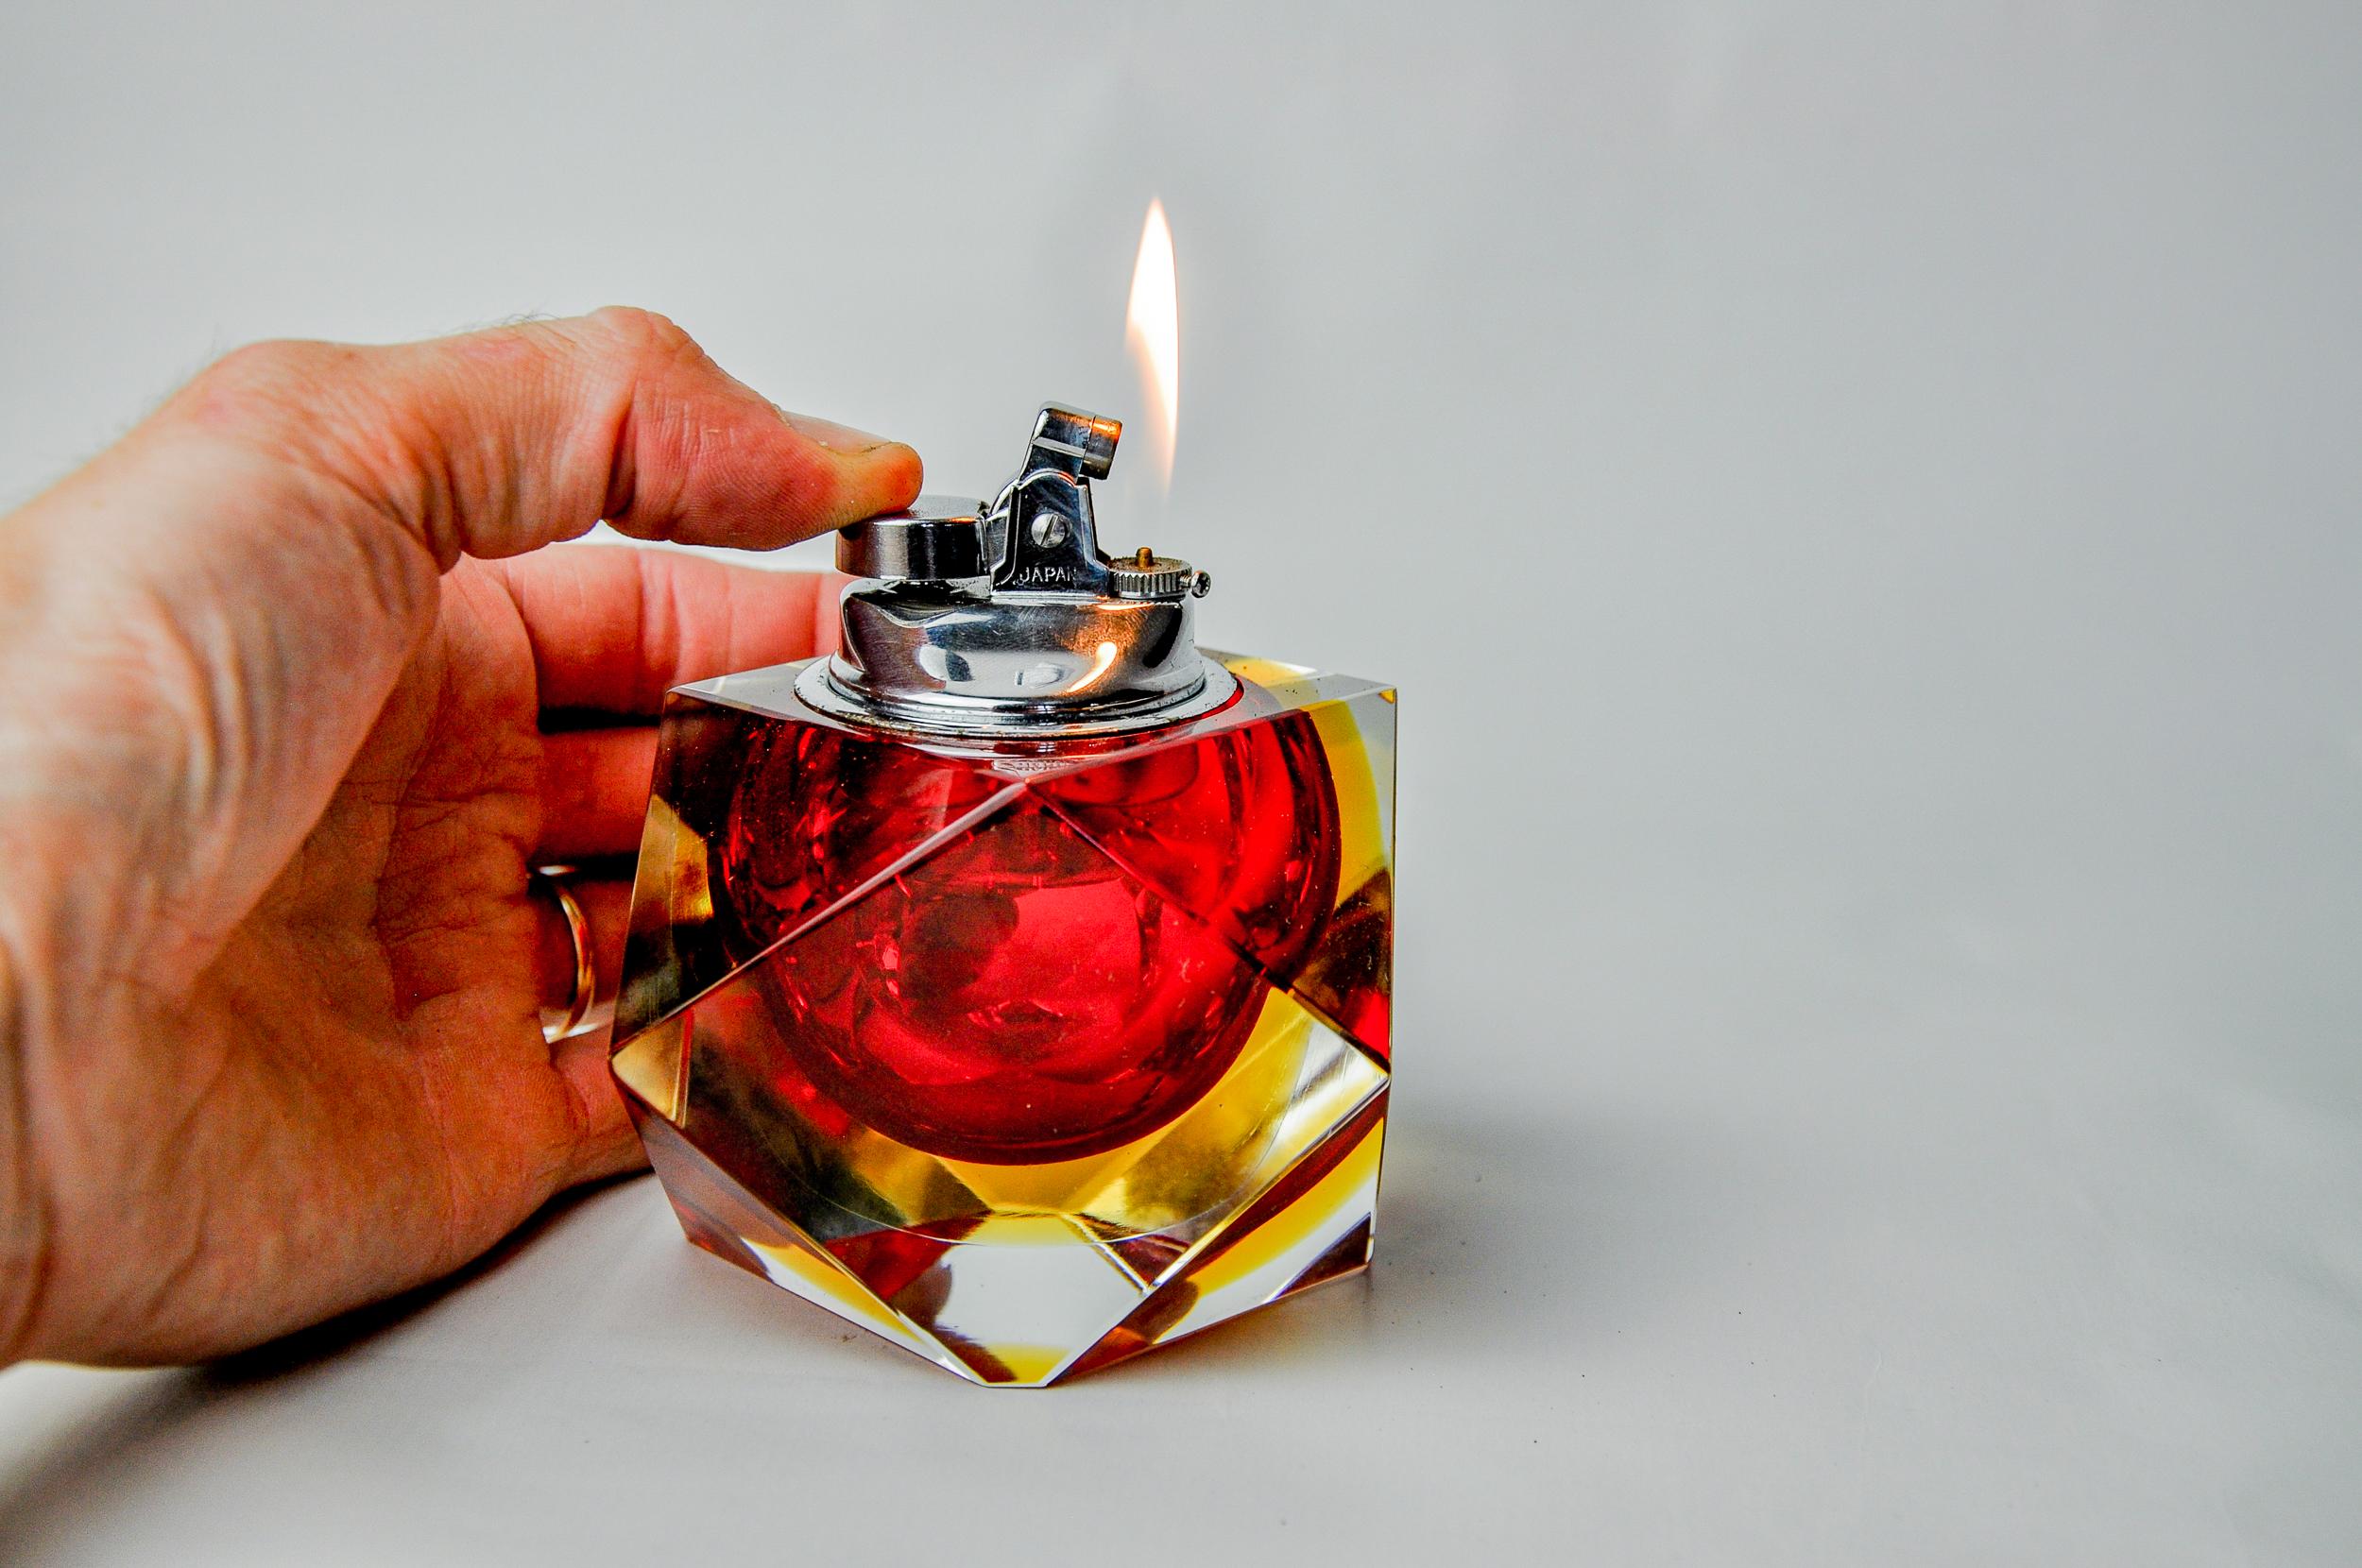 Superb and rare red and yellow faceted sommerso lighter designated and manufactured for seguso in murano in the 1970s. Artisanal work of faceted glass according to the 